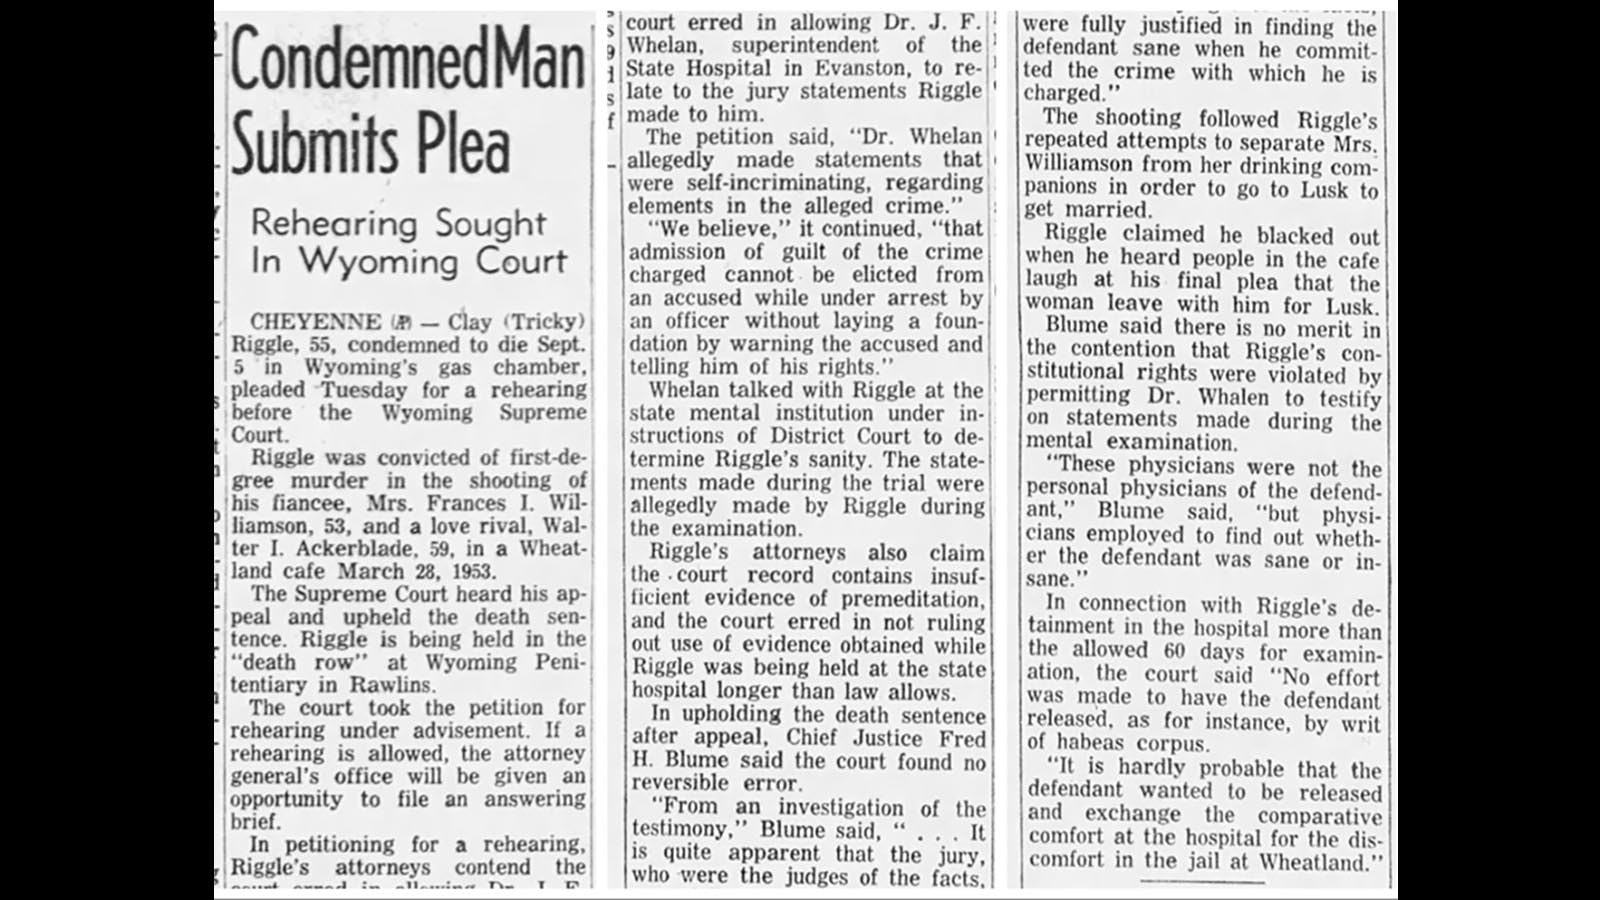 A newspaper clipping reporting on Tricky Riggle's appeal of his death sentence for killing his fiancée and a male friend in a fit of jealous rage.